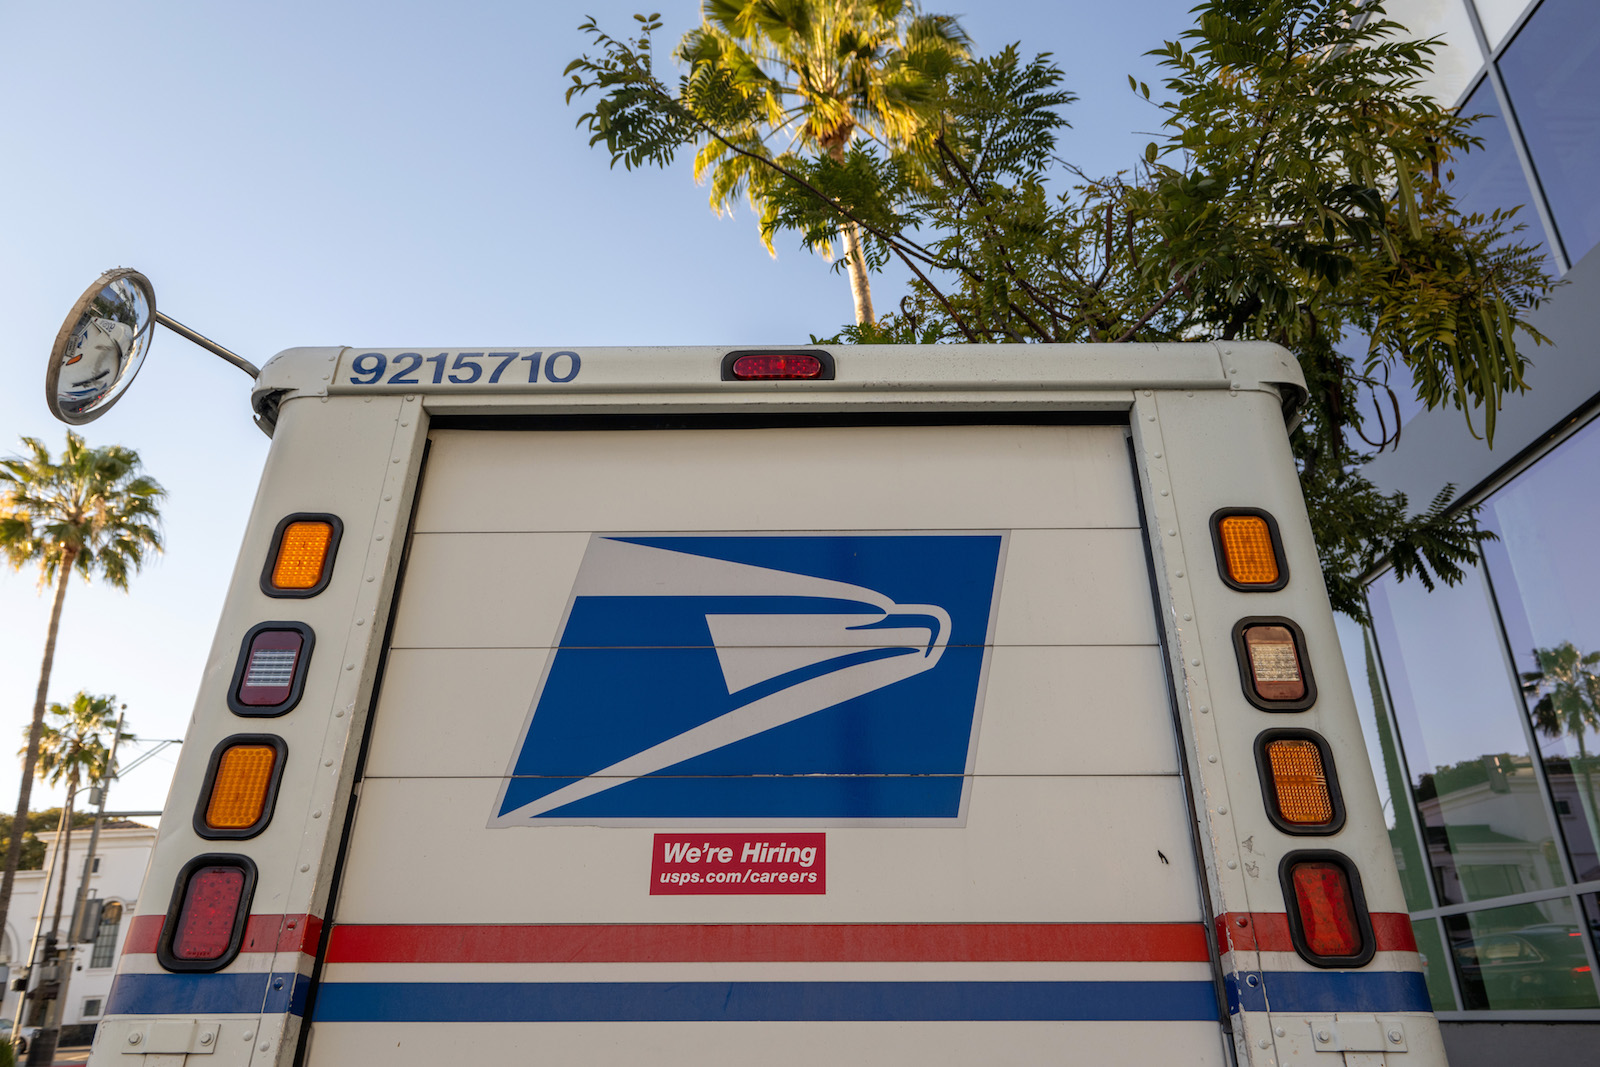 the back of a USPS mail truck with blue eagle logo and brake lights. In the background, palm trees and blue skies